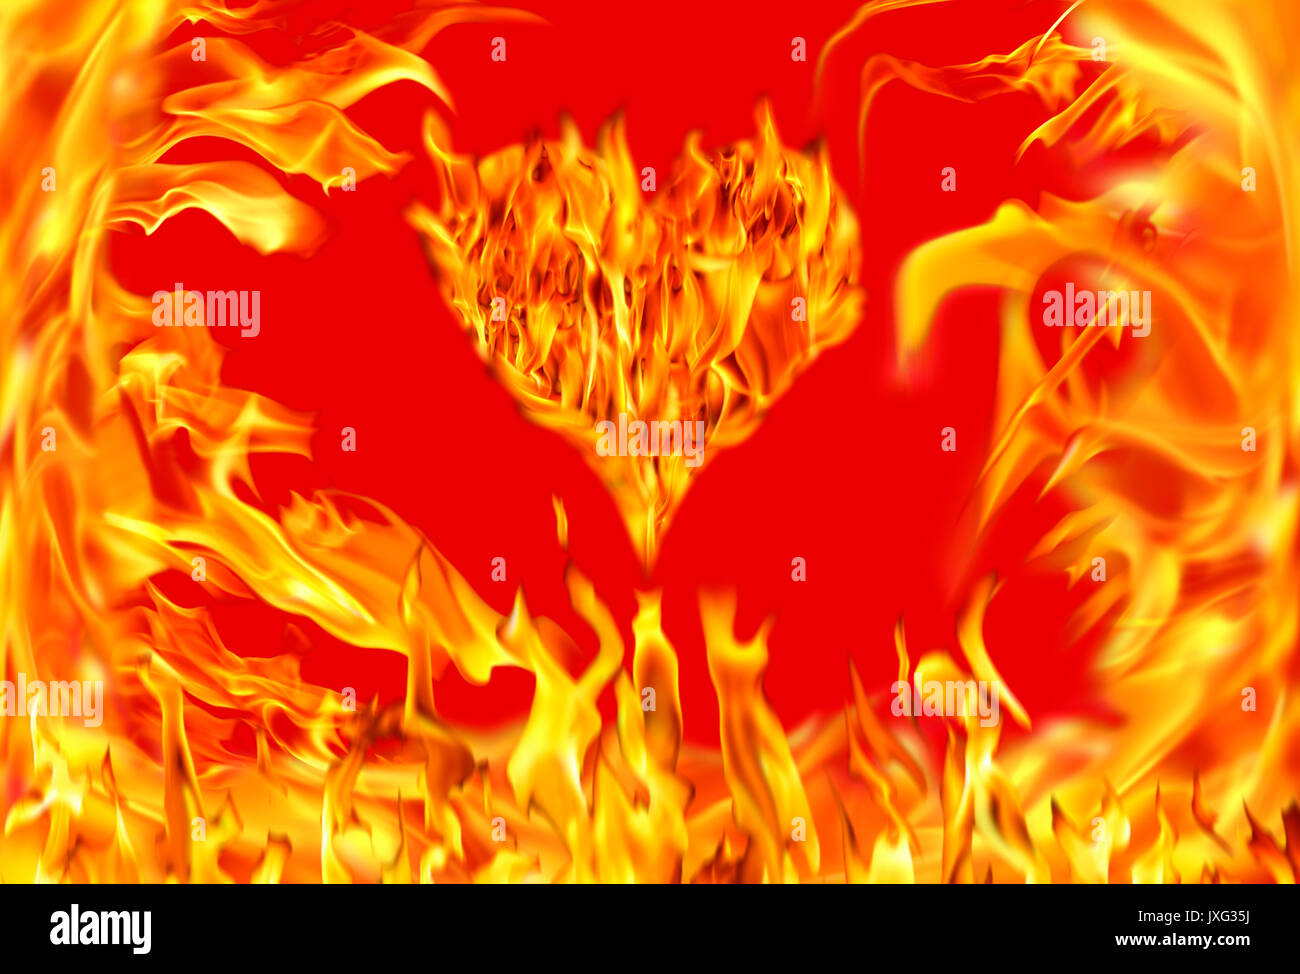 Conceptual image of burning heart shape and fire flames Stock